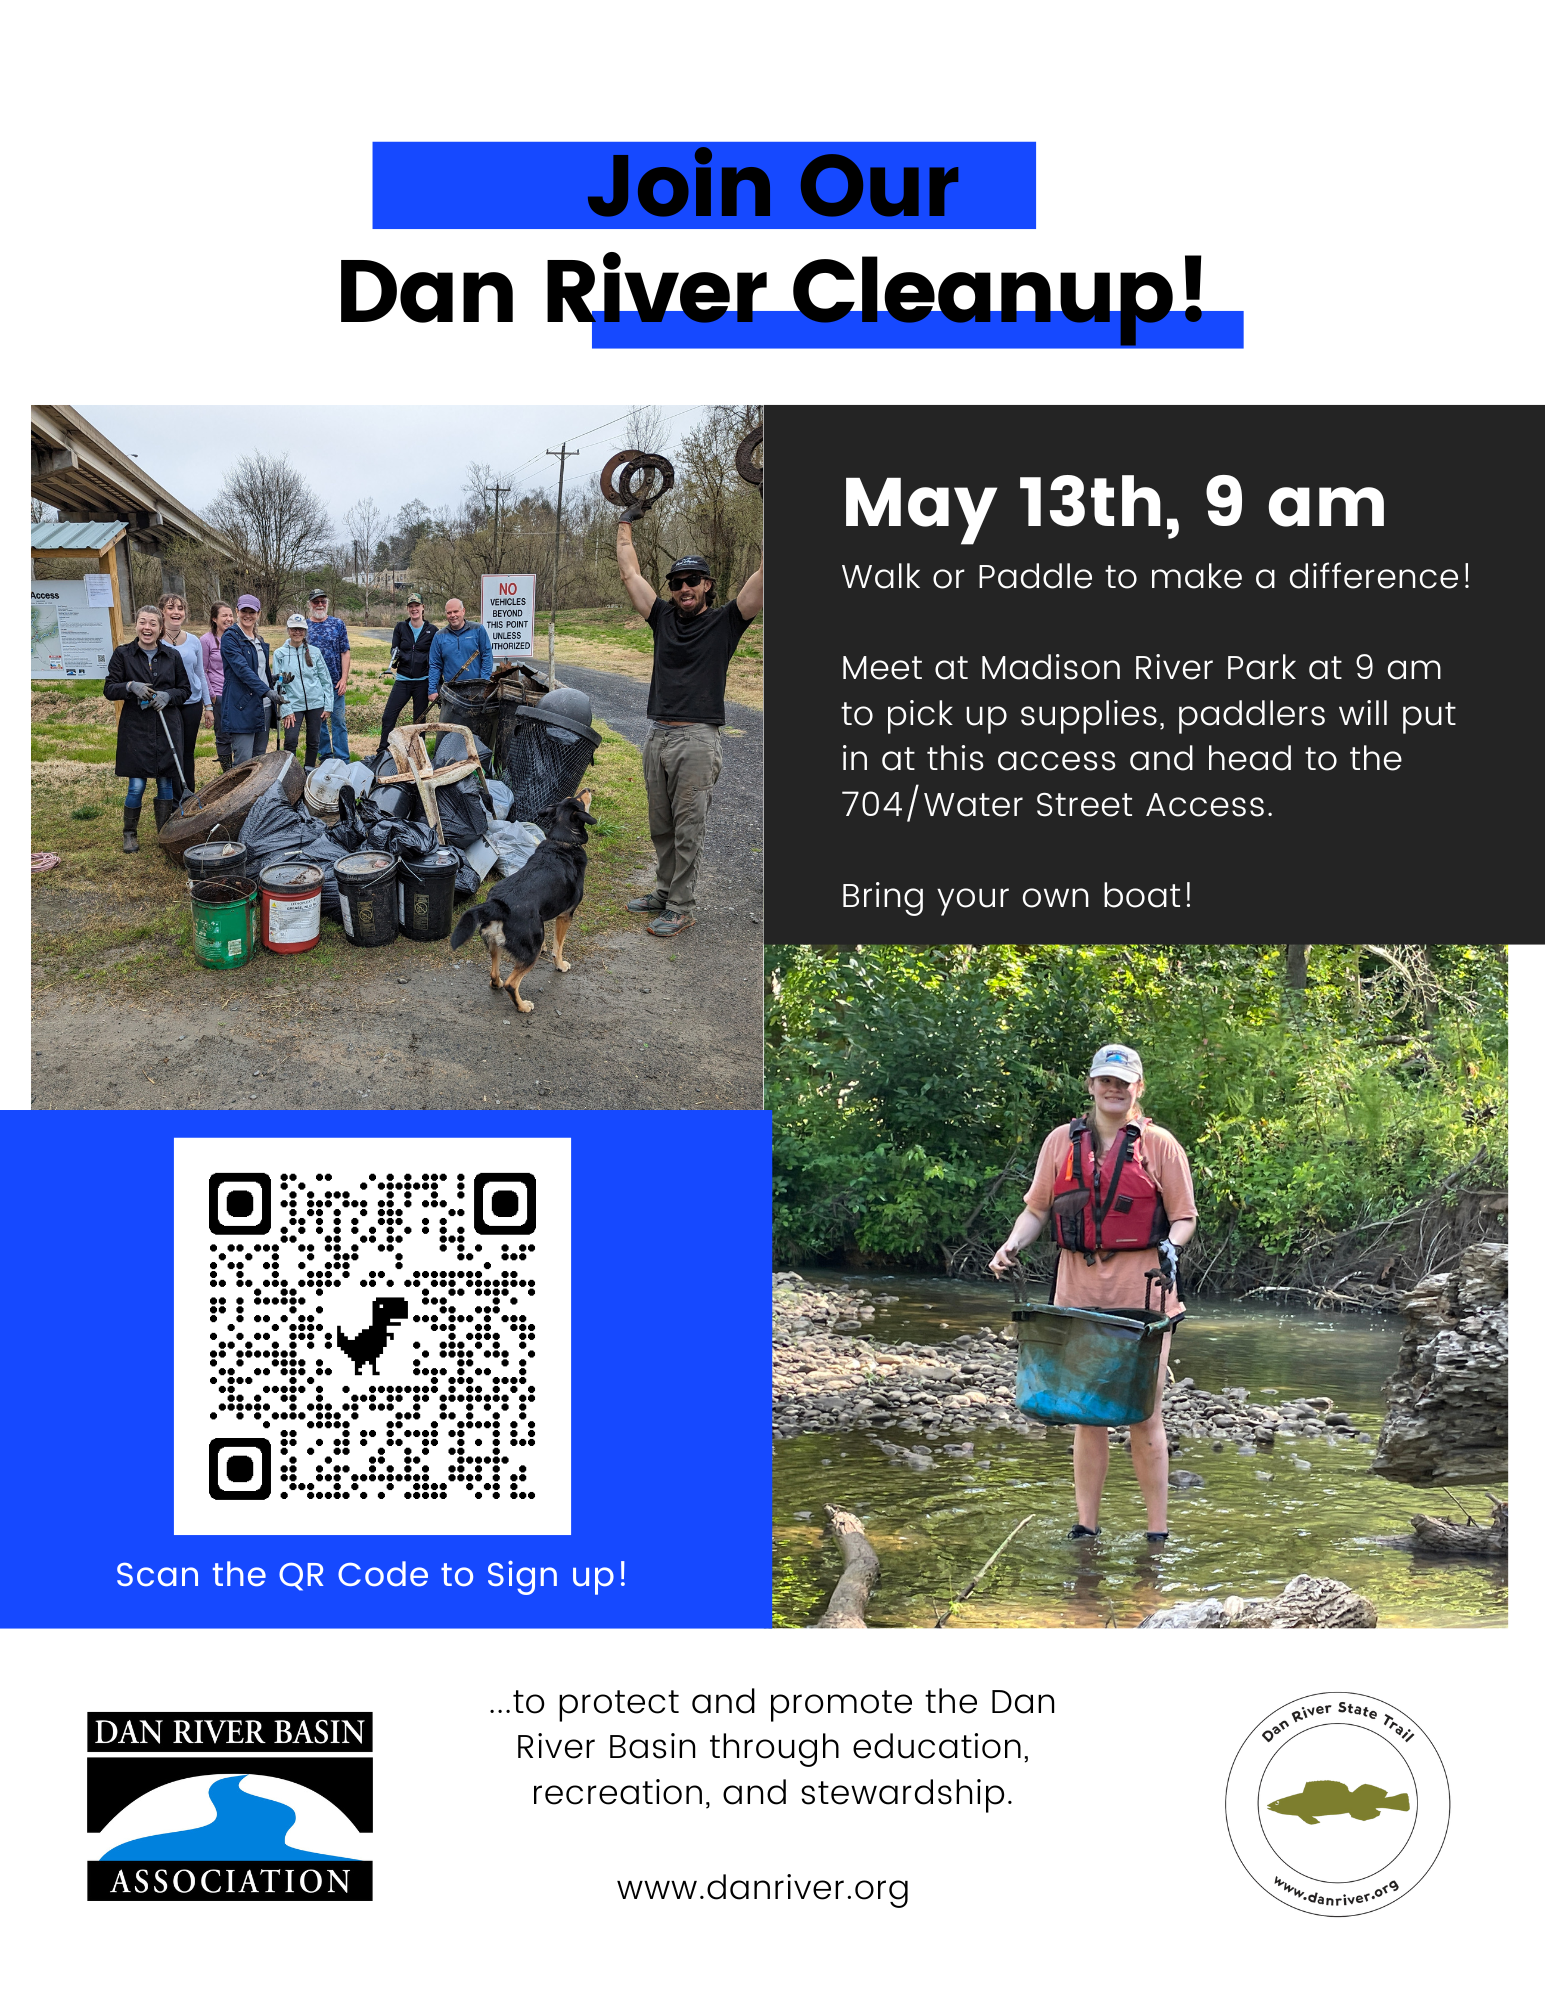 Dan River Clean up flyer with a QR Code